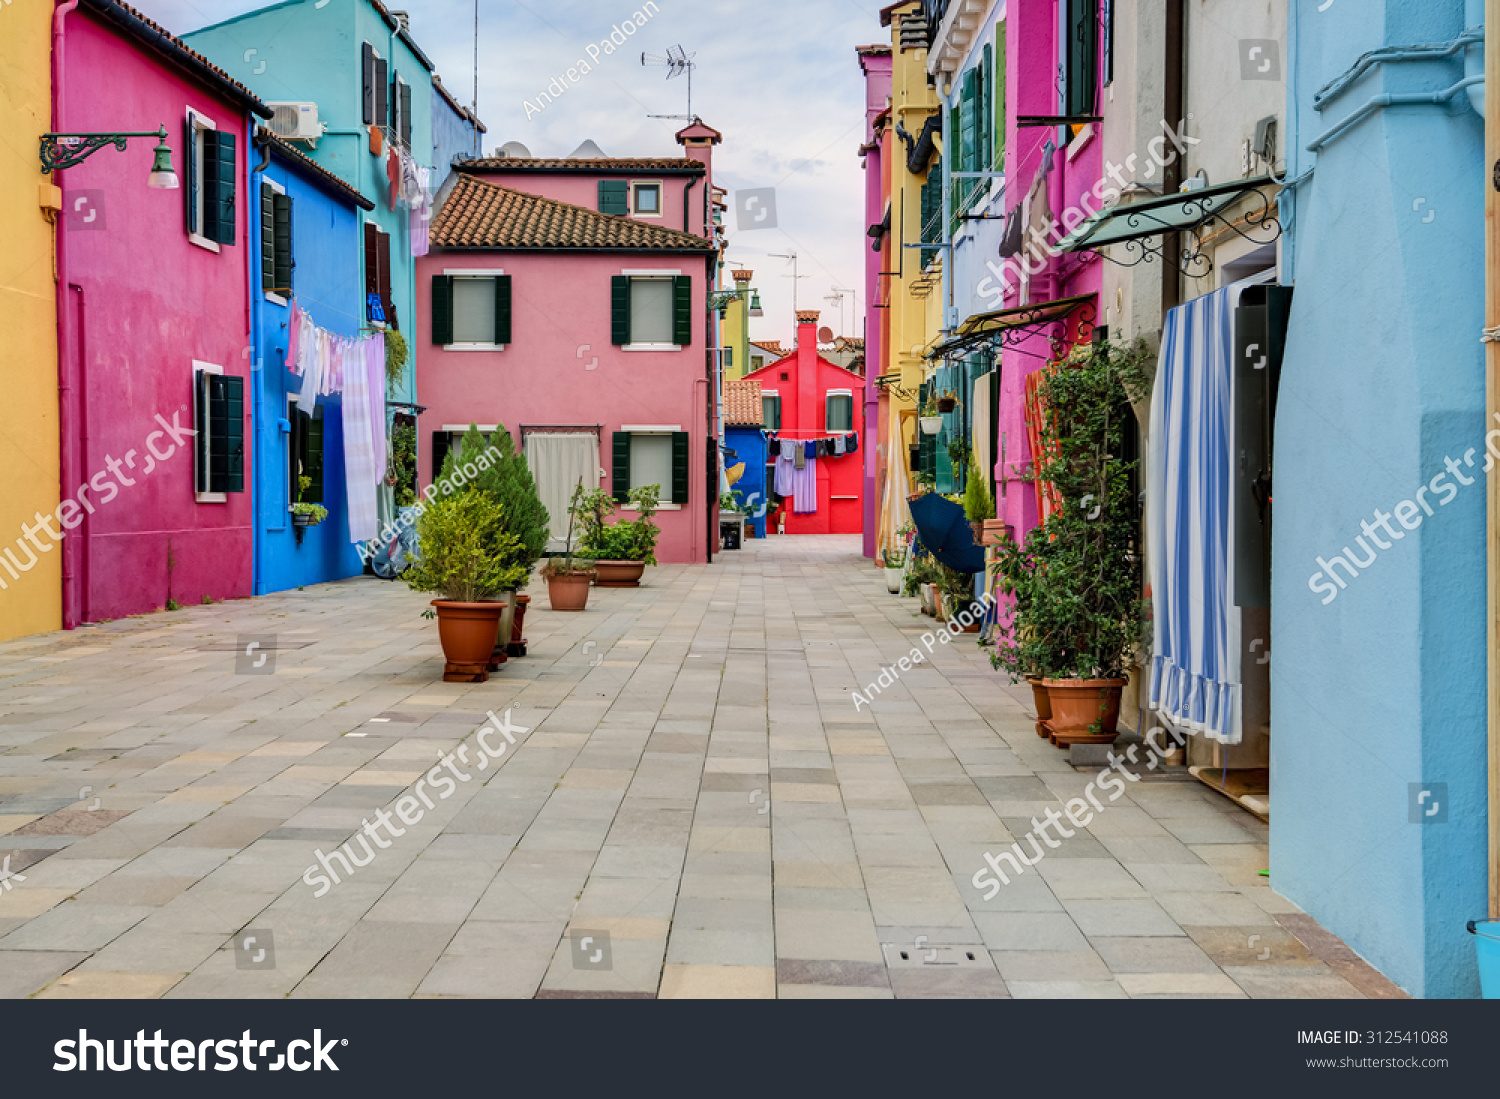 Colorful houses of Burano island, Venice, Italy. Taken on August 21, 2015. #312541088